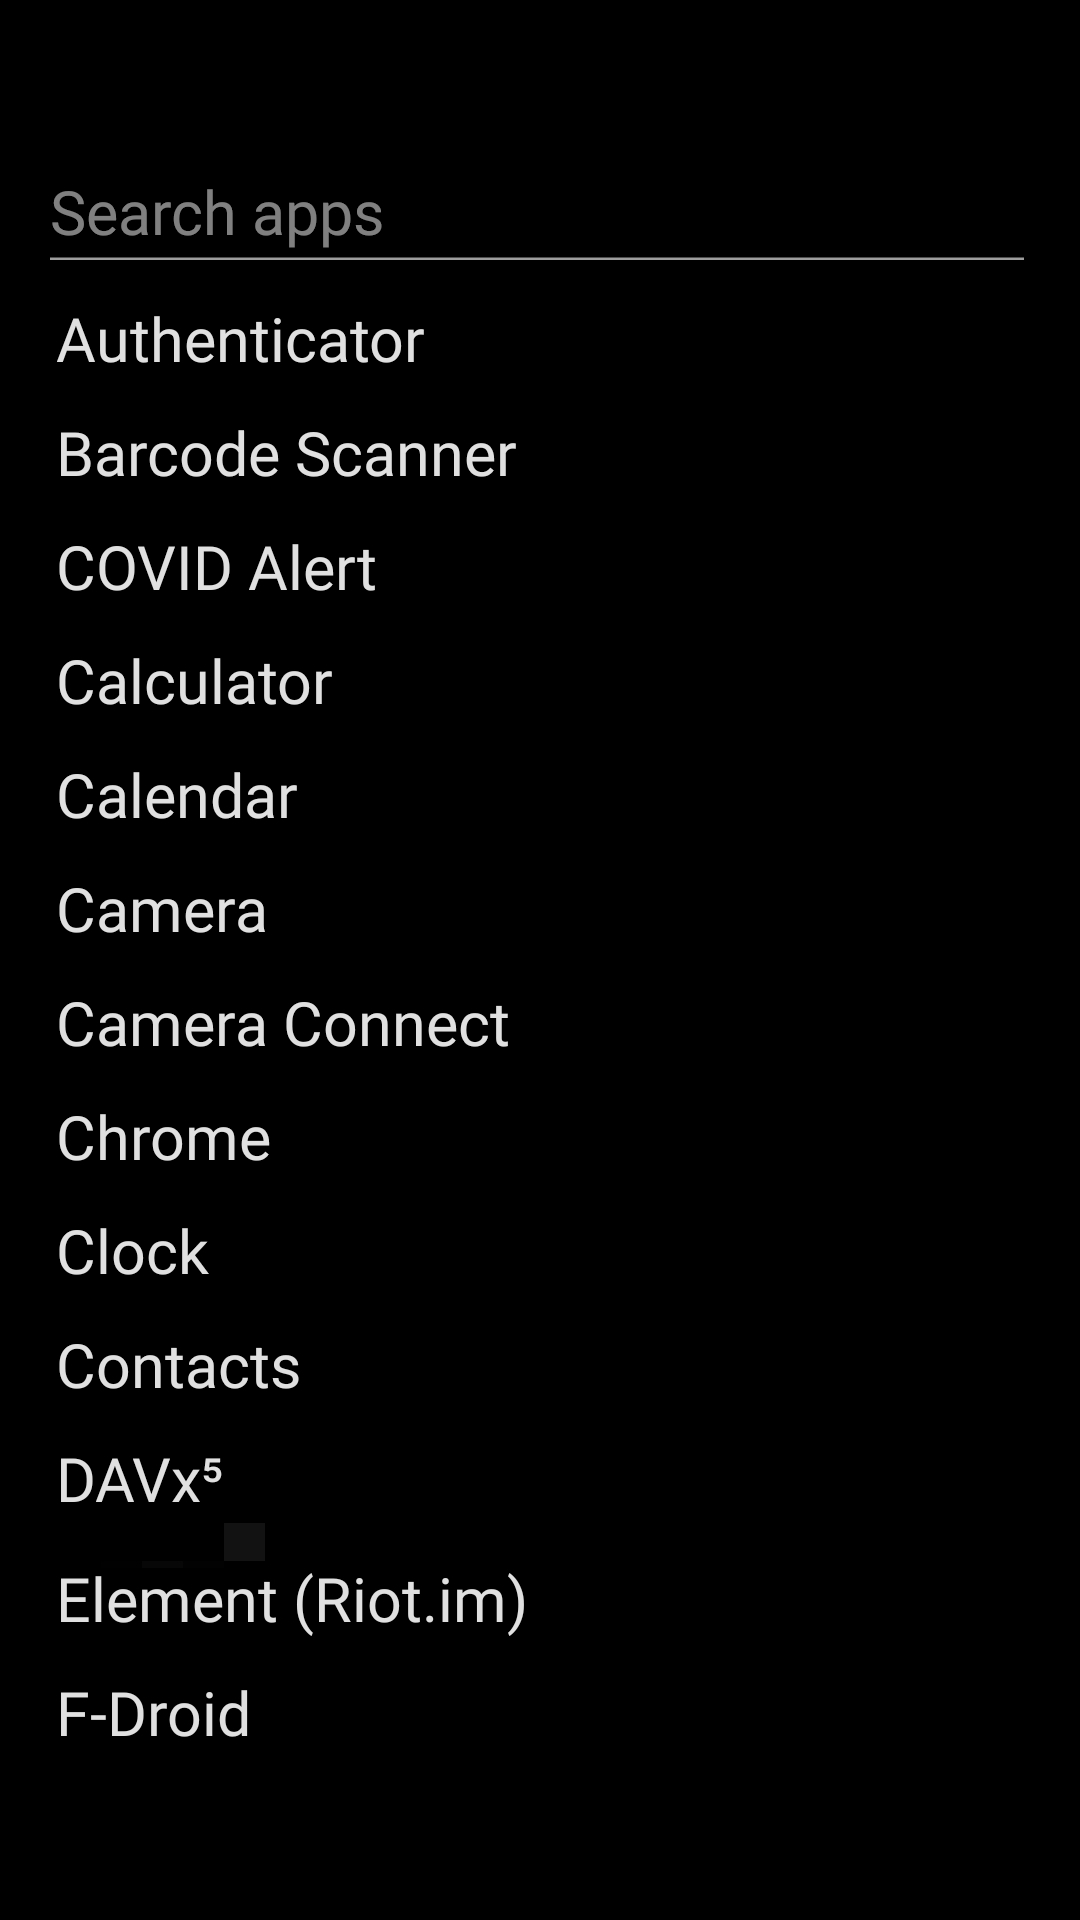 App drawer on my Android smartphone, showing scrollable list of apps names in white text over black background